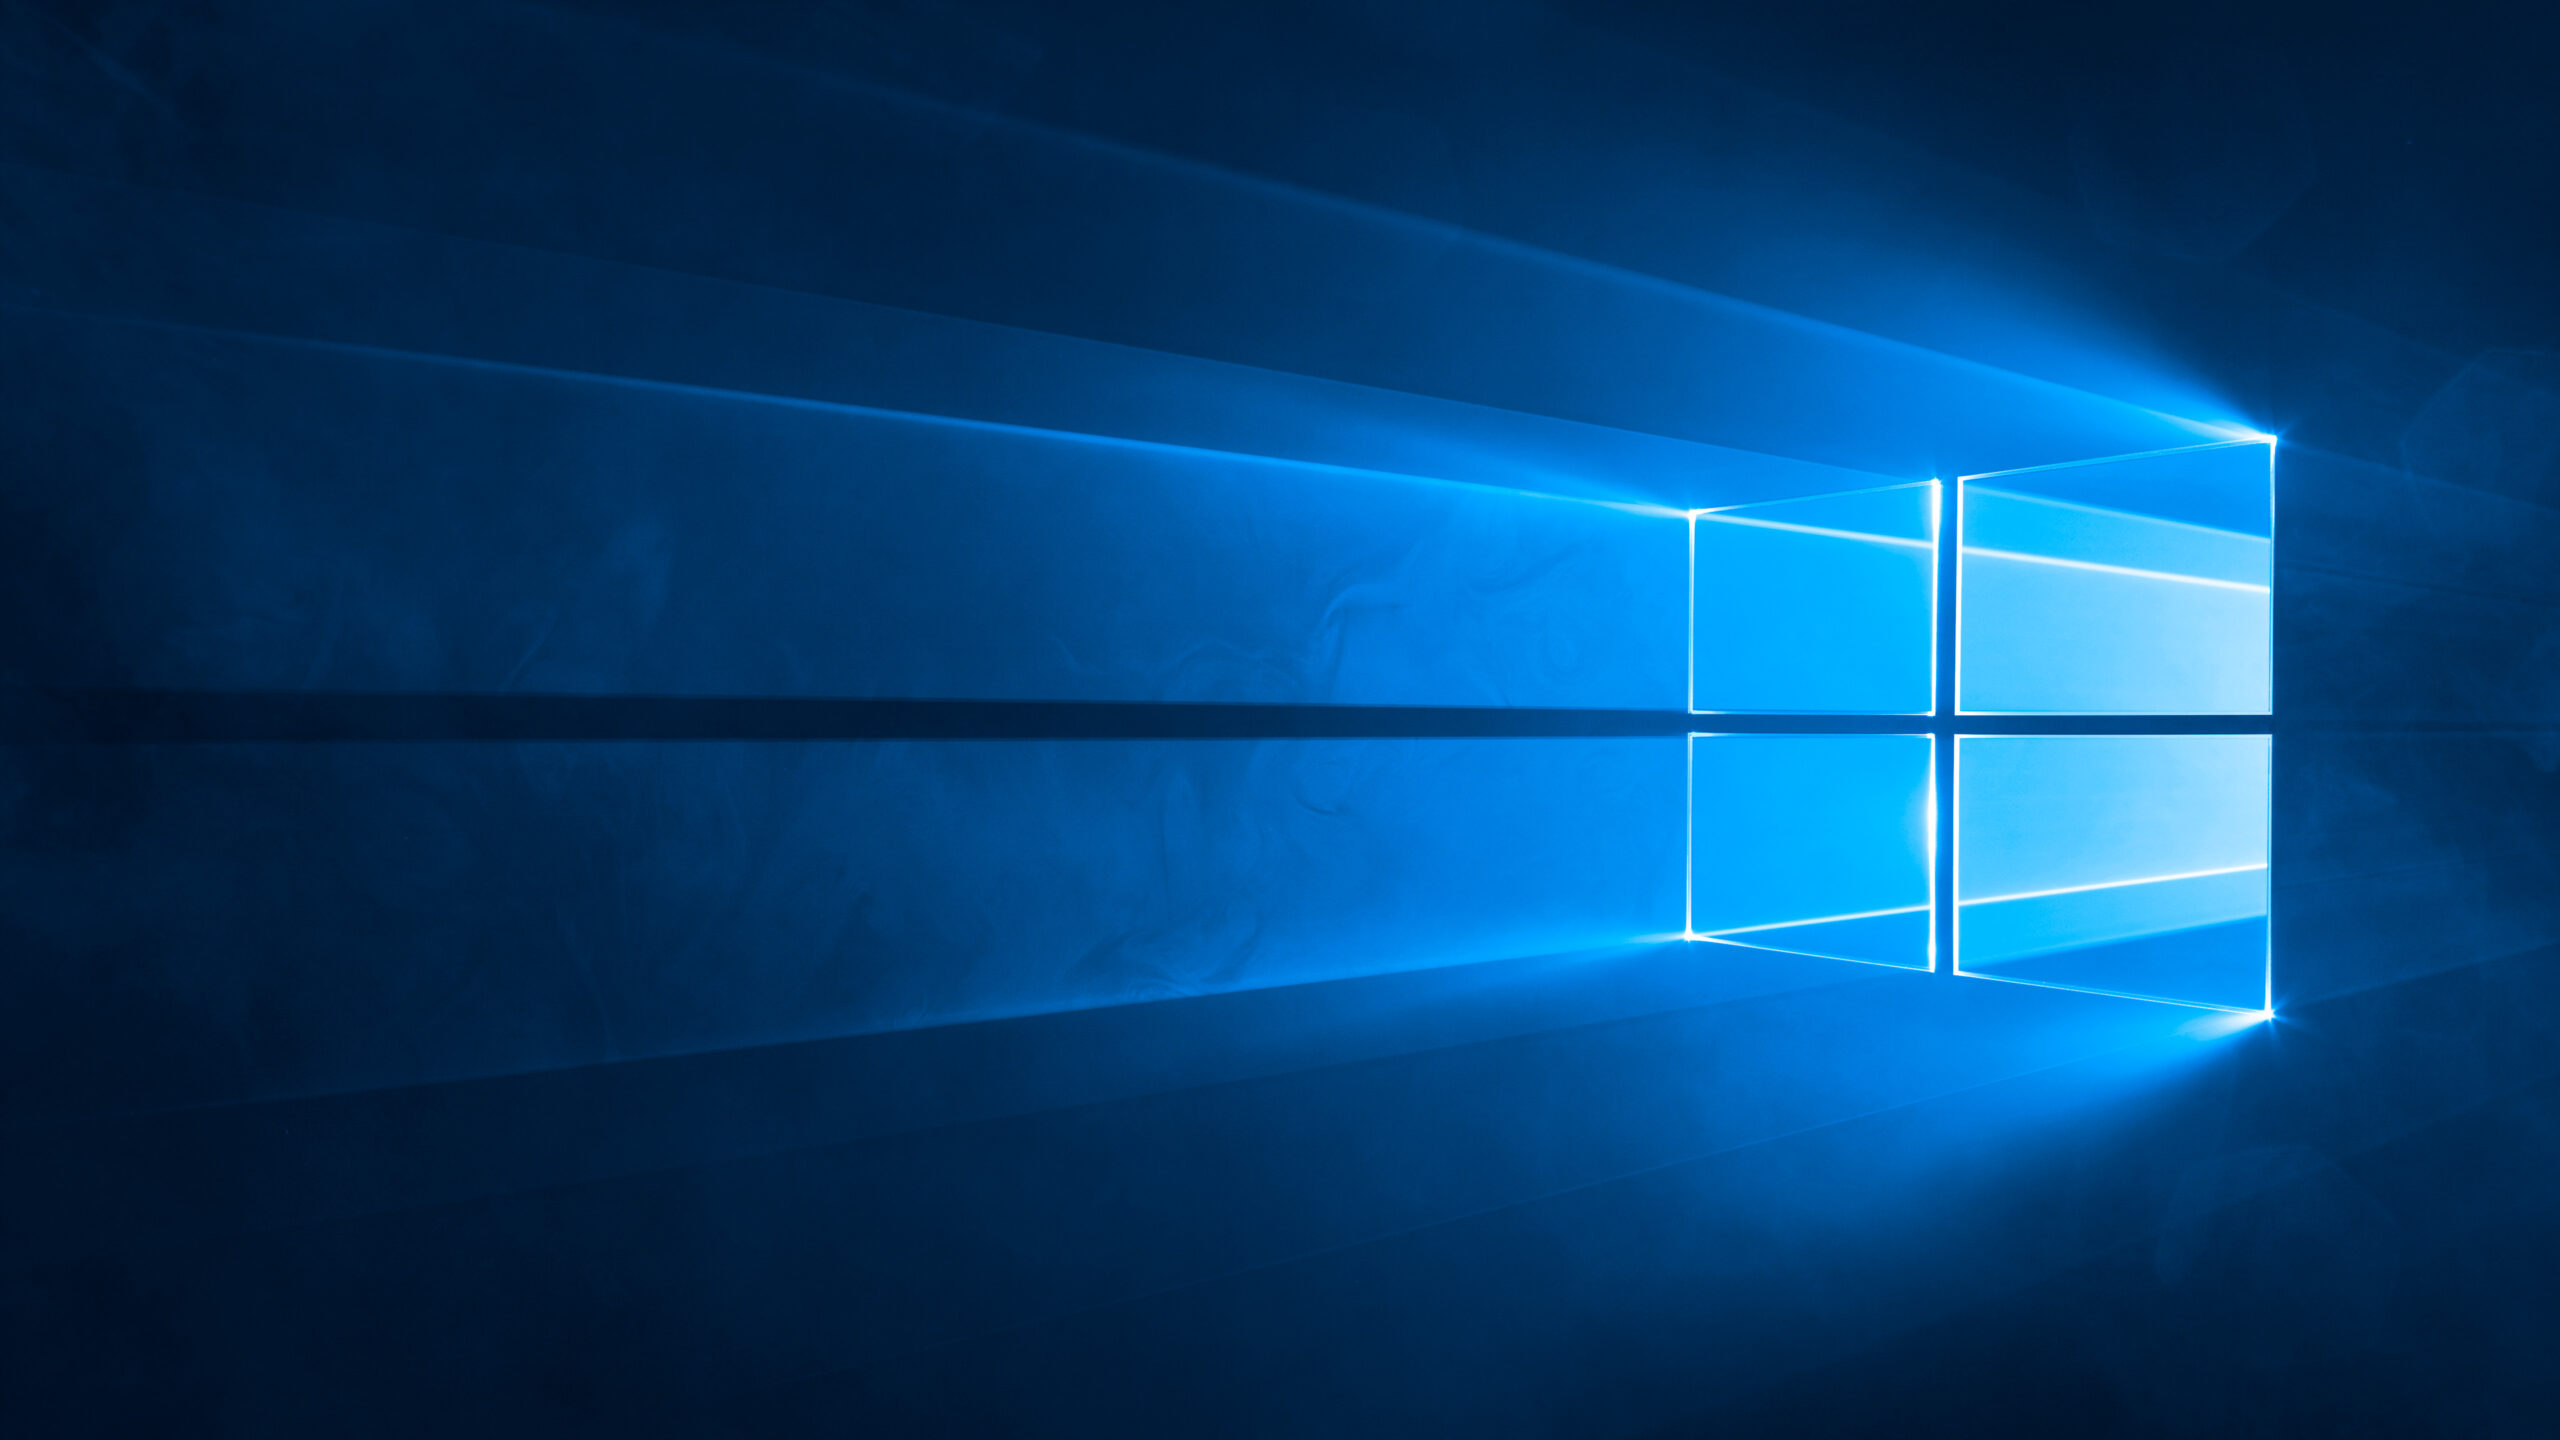 Windows 10 ltsc to receive support for only five years 532226 2 scaled